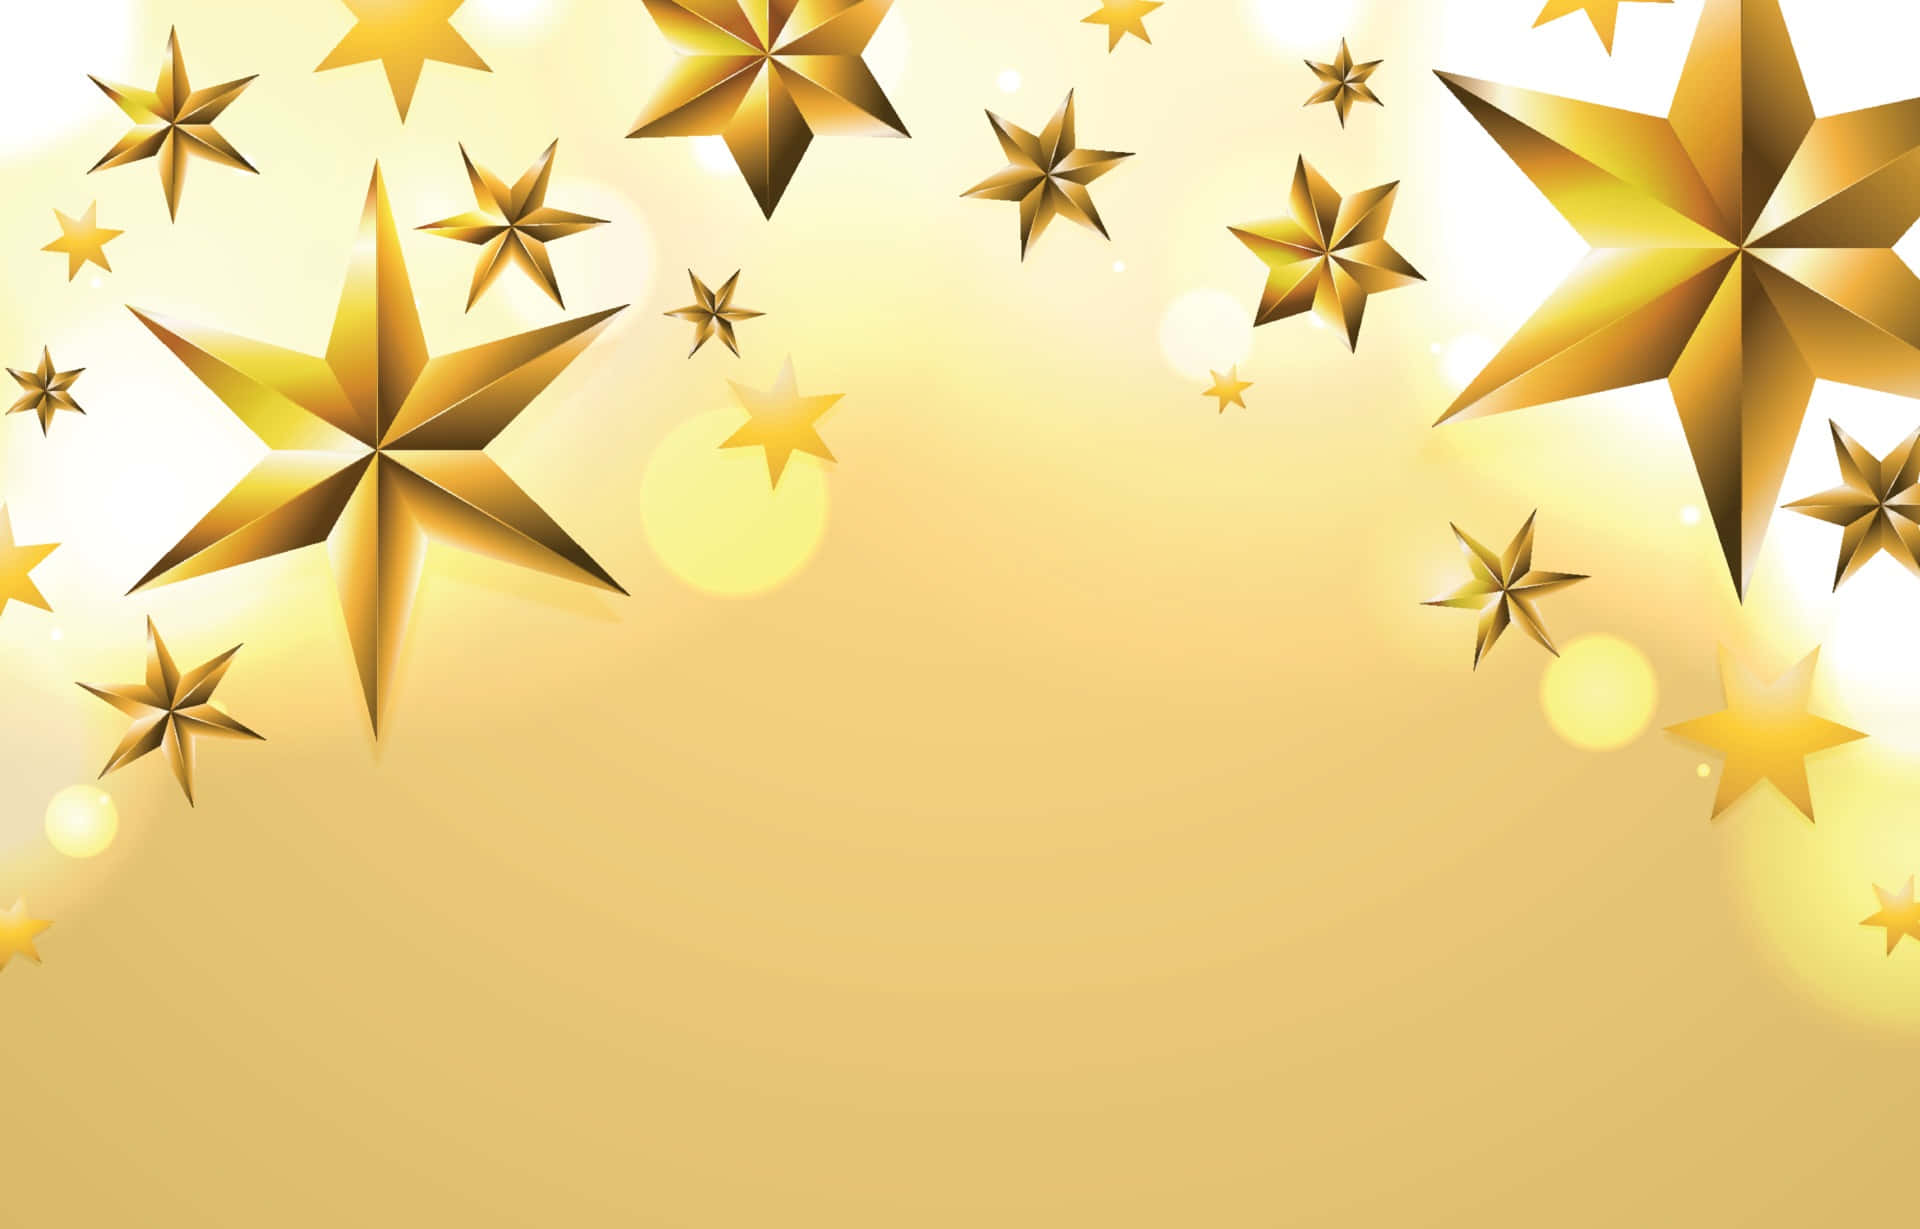 Celebrate success with a golden star!